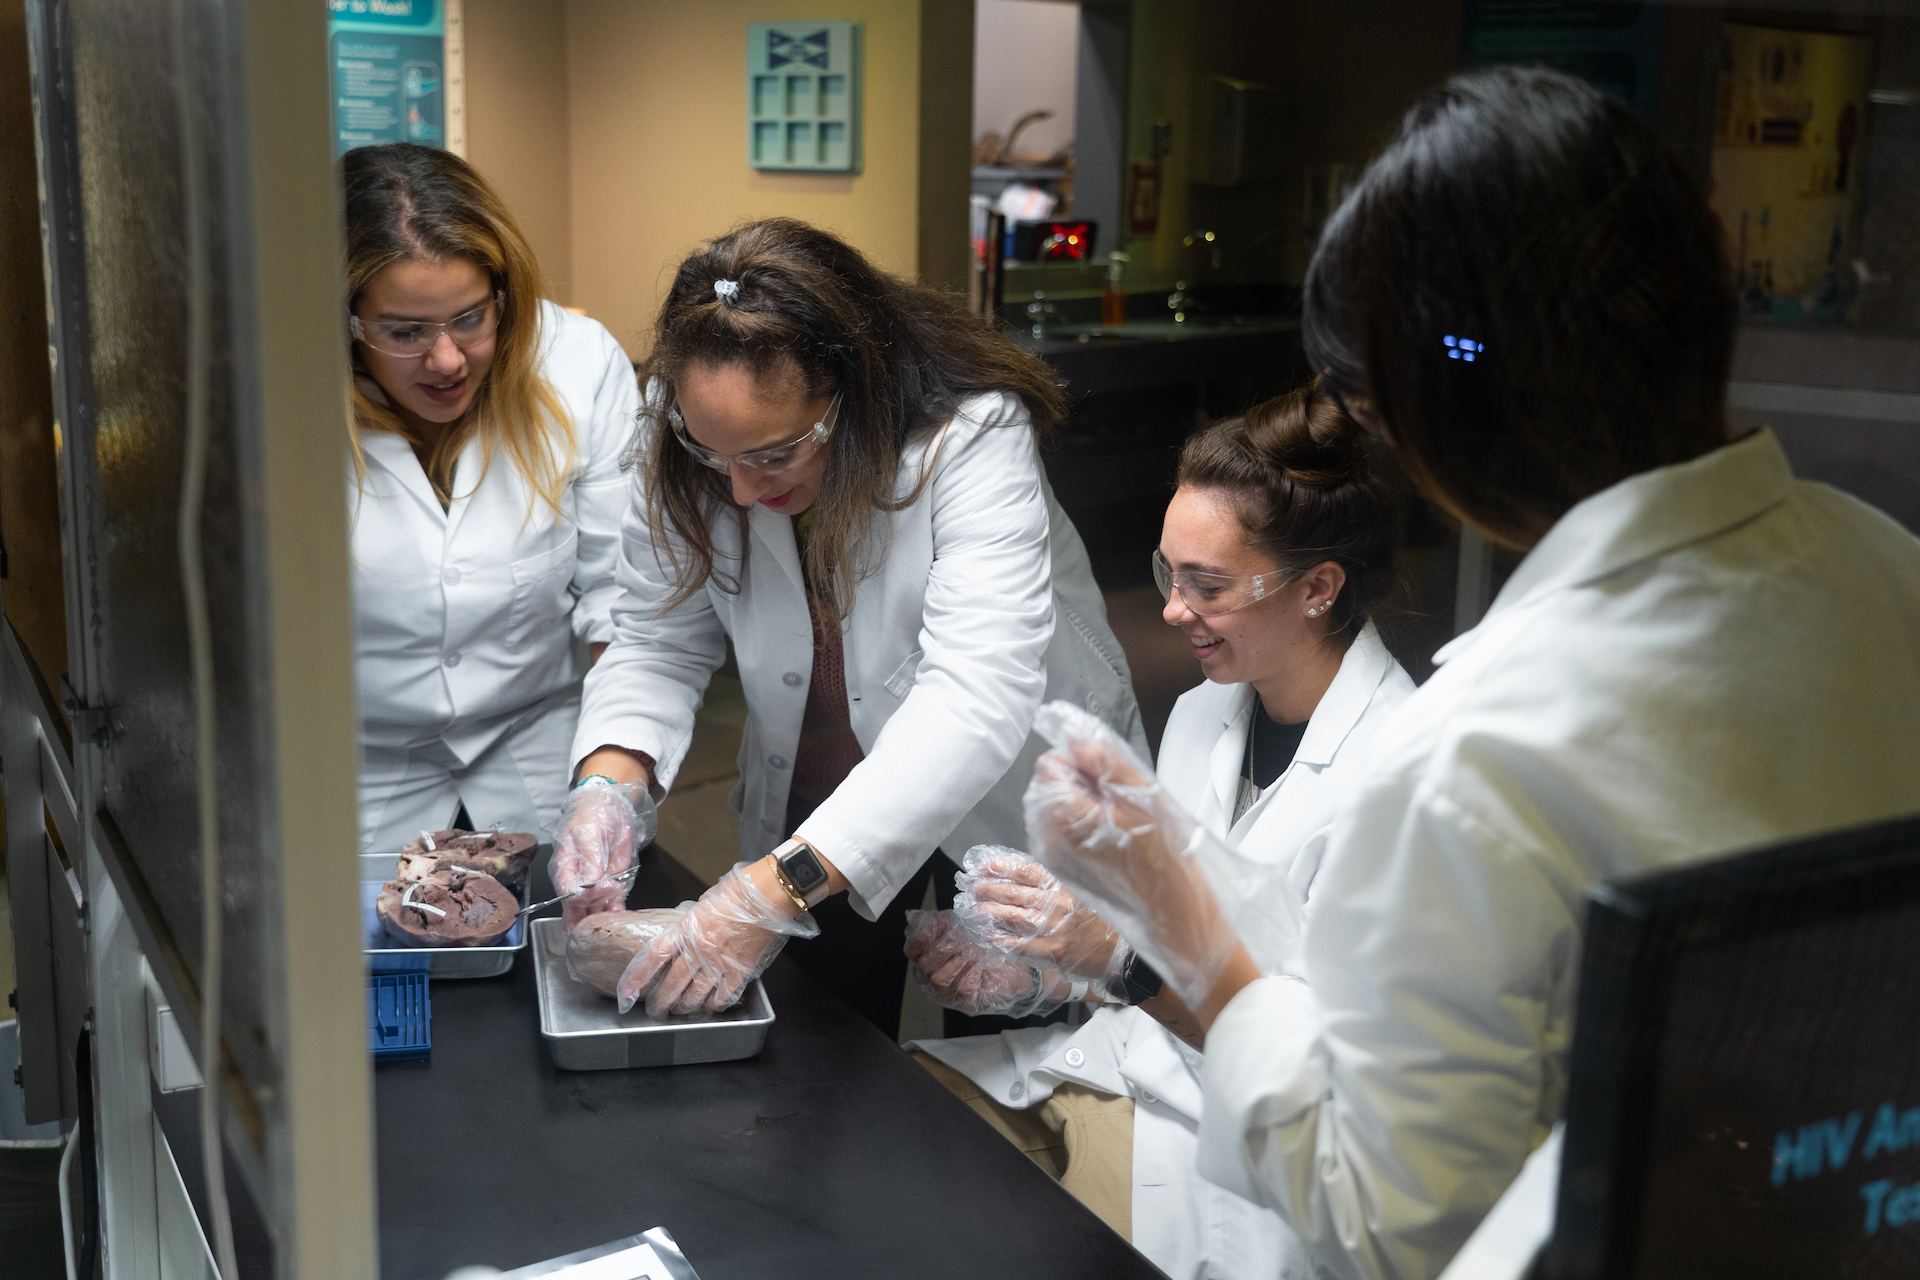 Guests dissecting a pig heart in lab coats